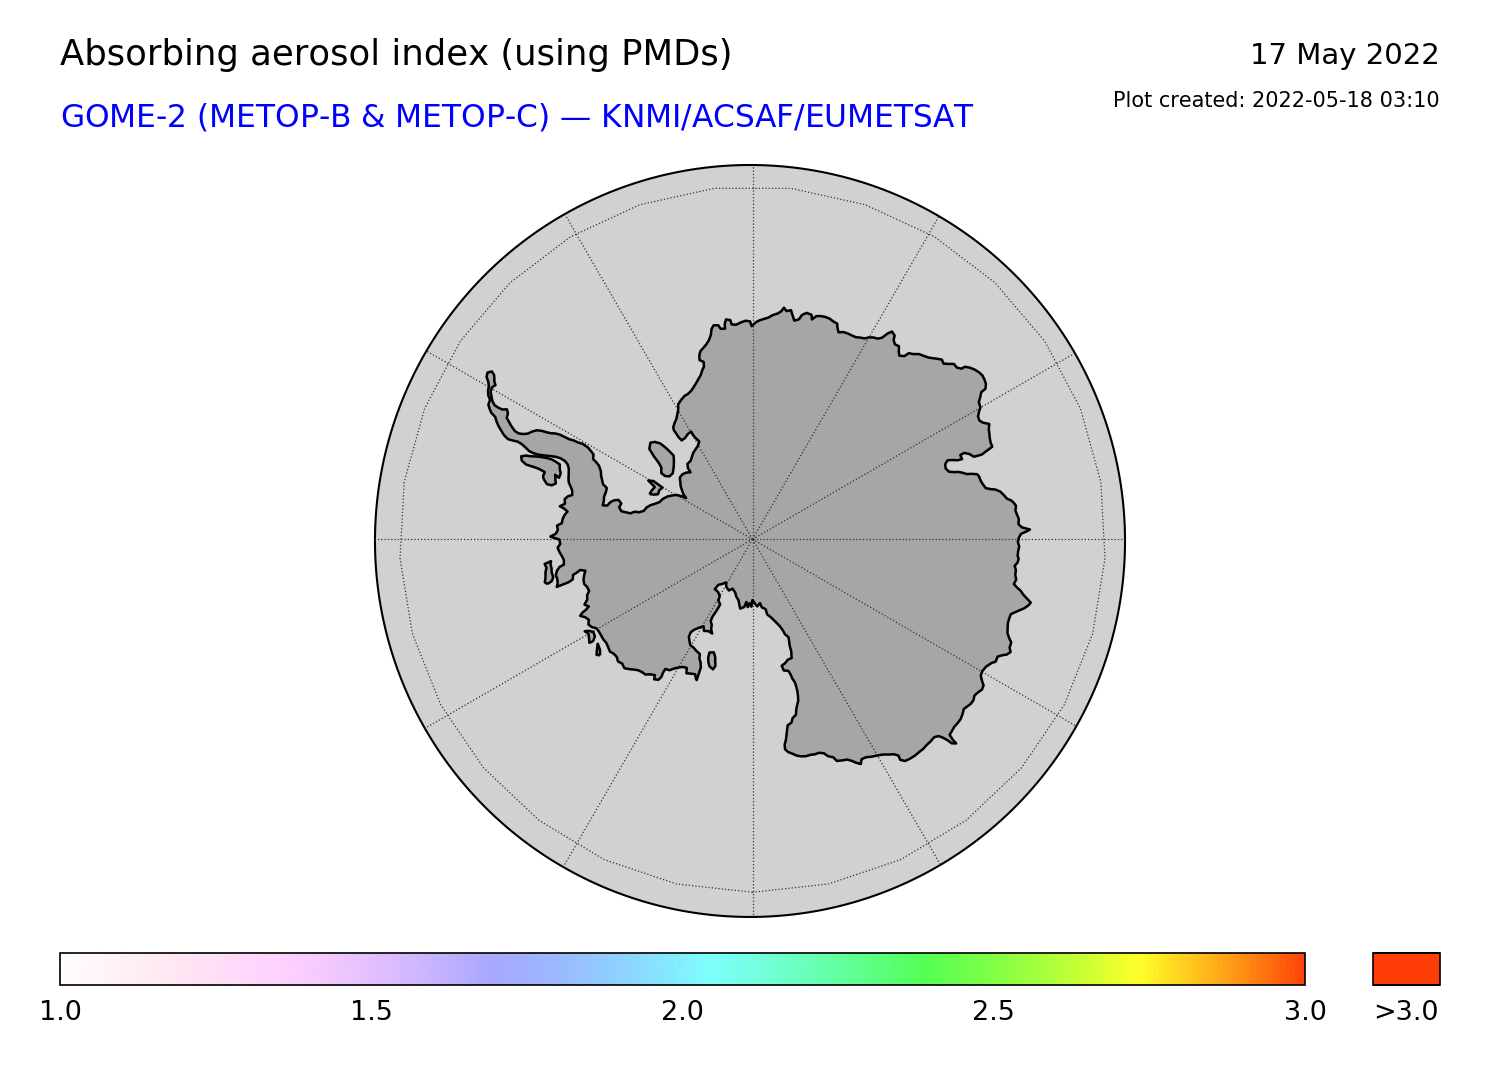 GOME-2 - Absorbing aerosol index of 17 May 2022